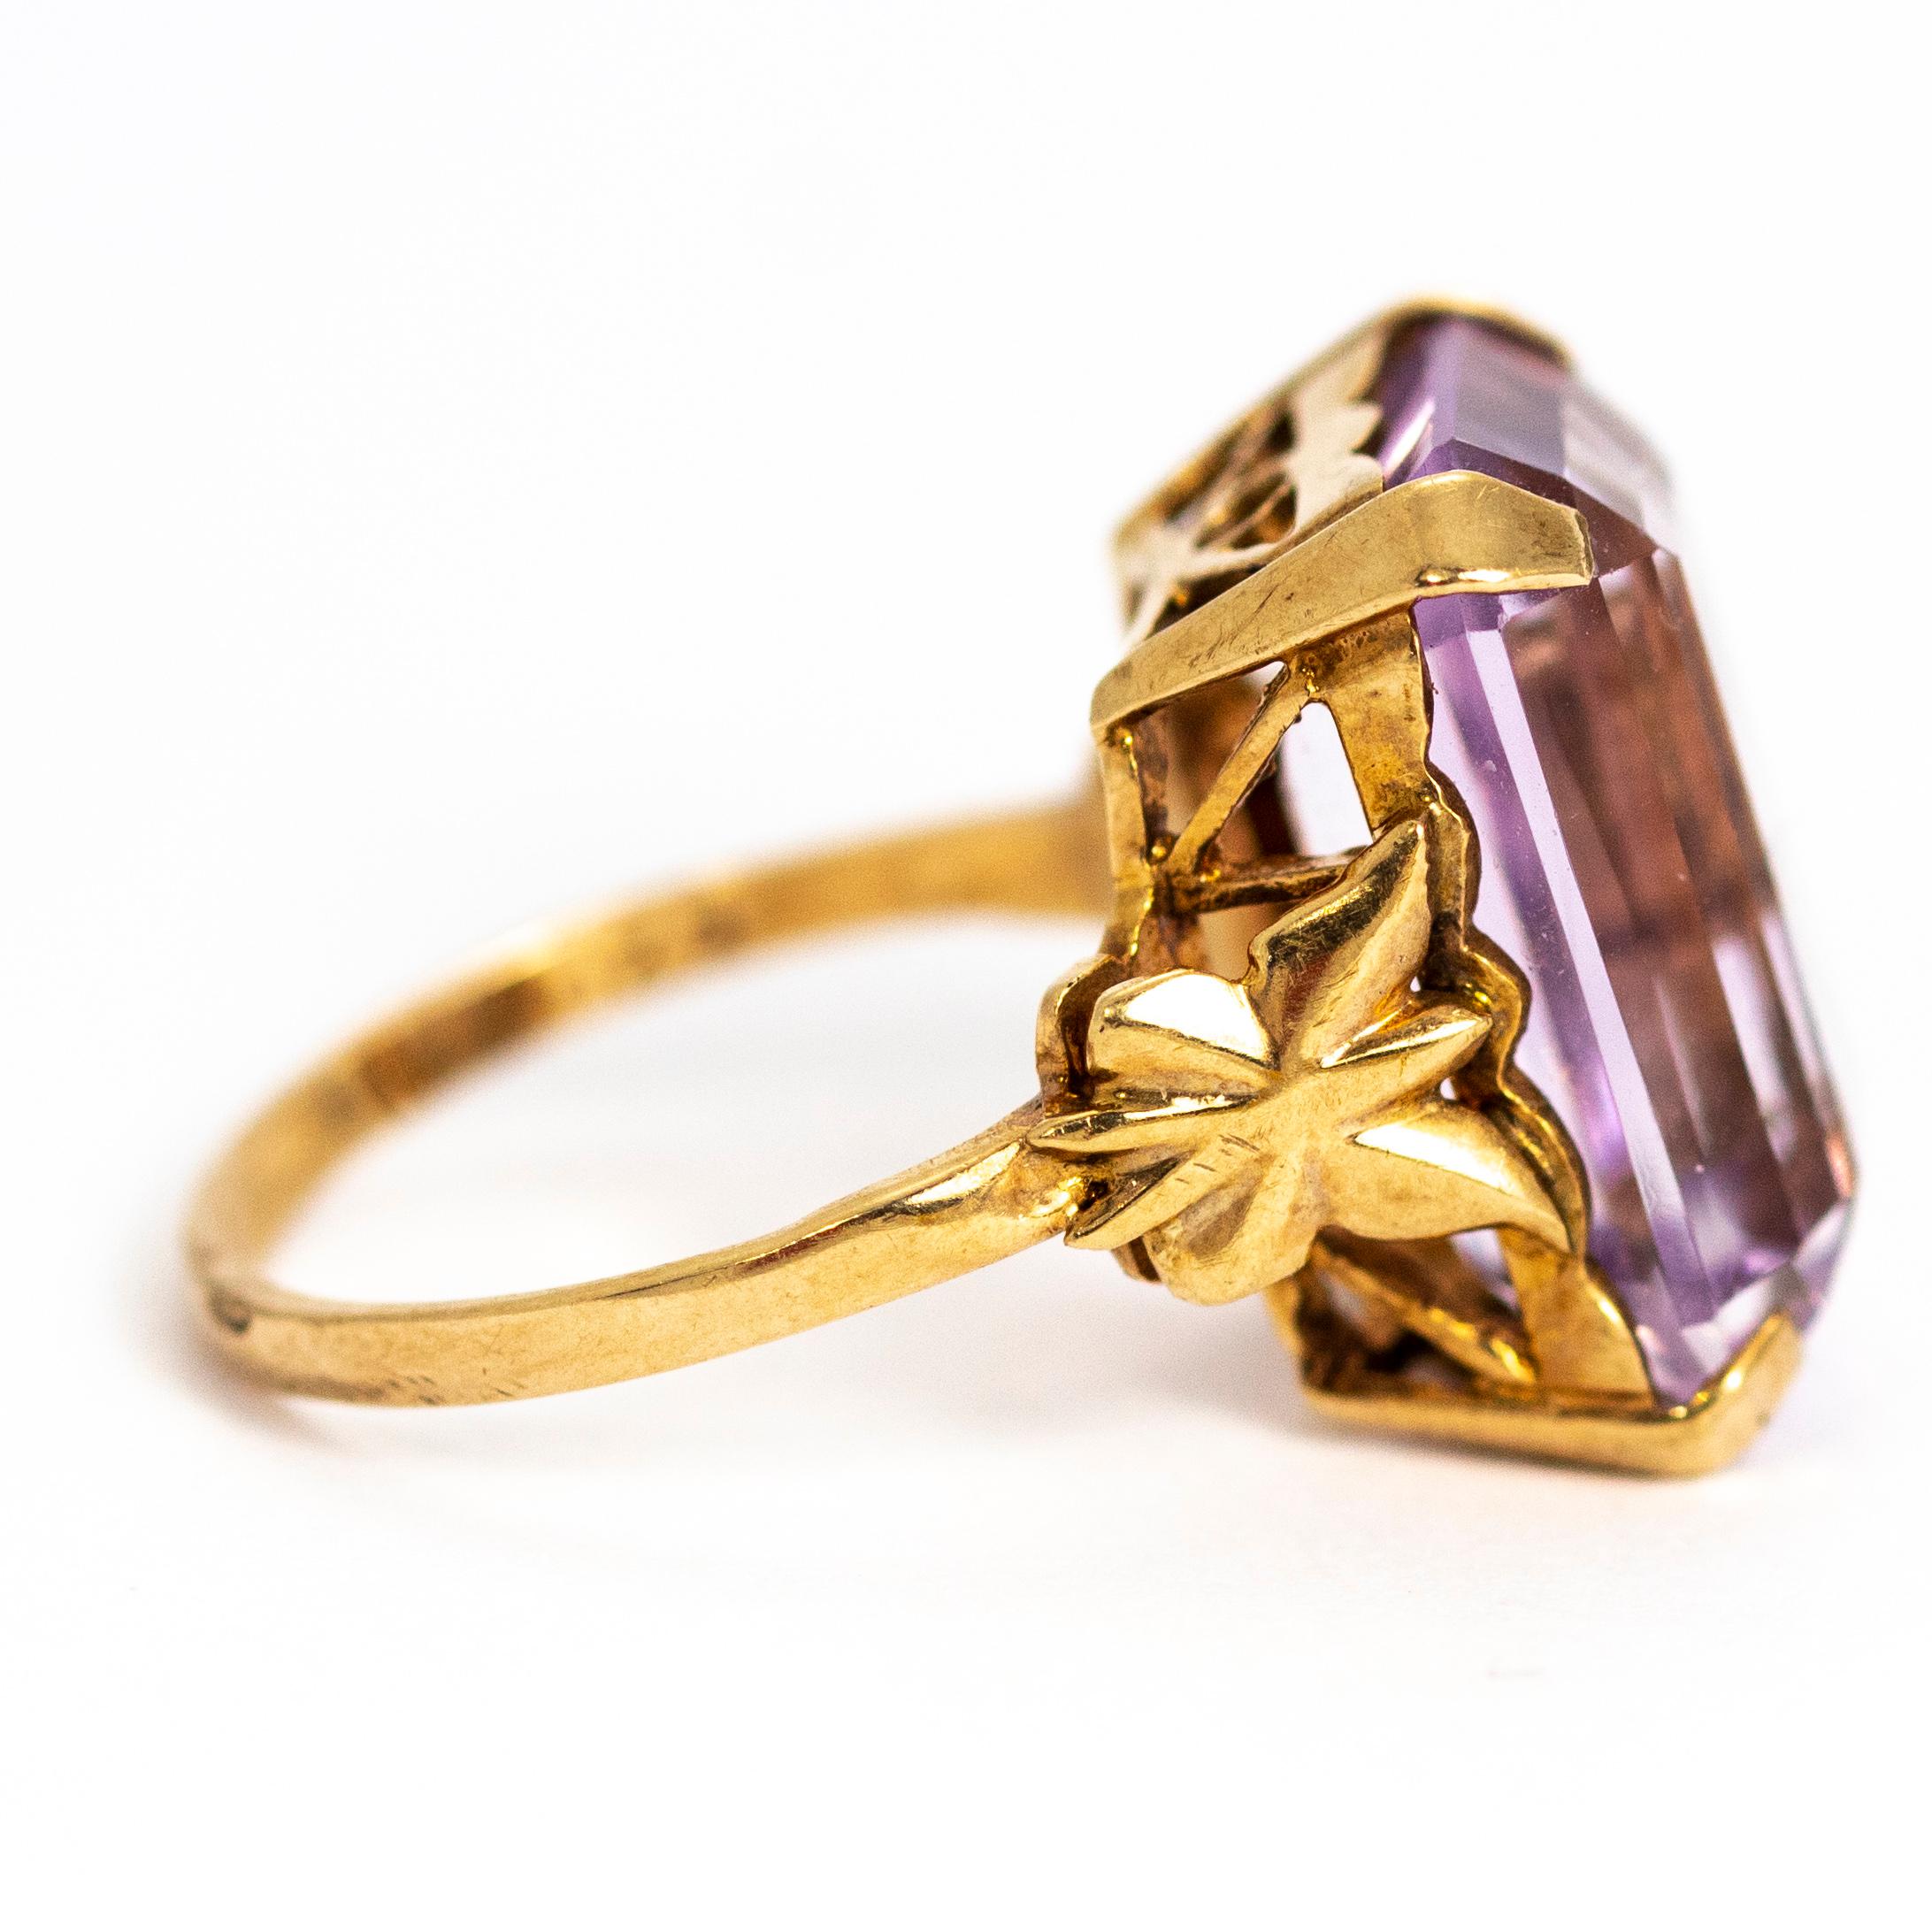 Emerald Cut Vintage Art Deco Style 9 Carat Gold Amethyst Cocktail Ring